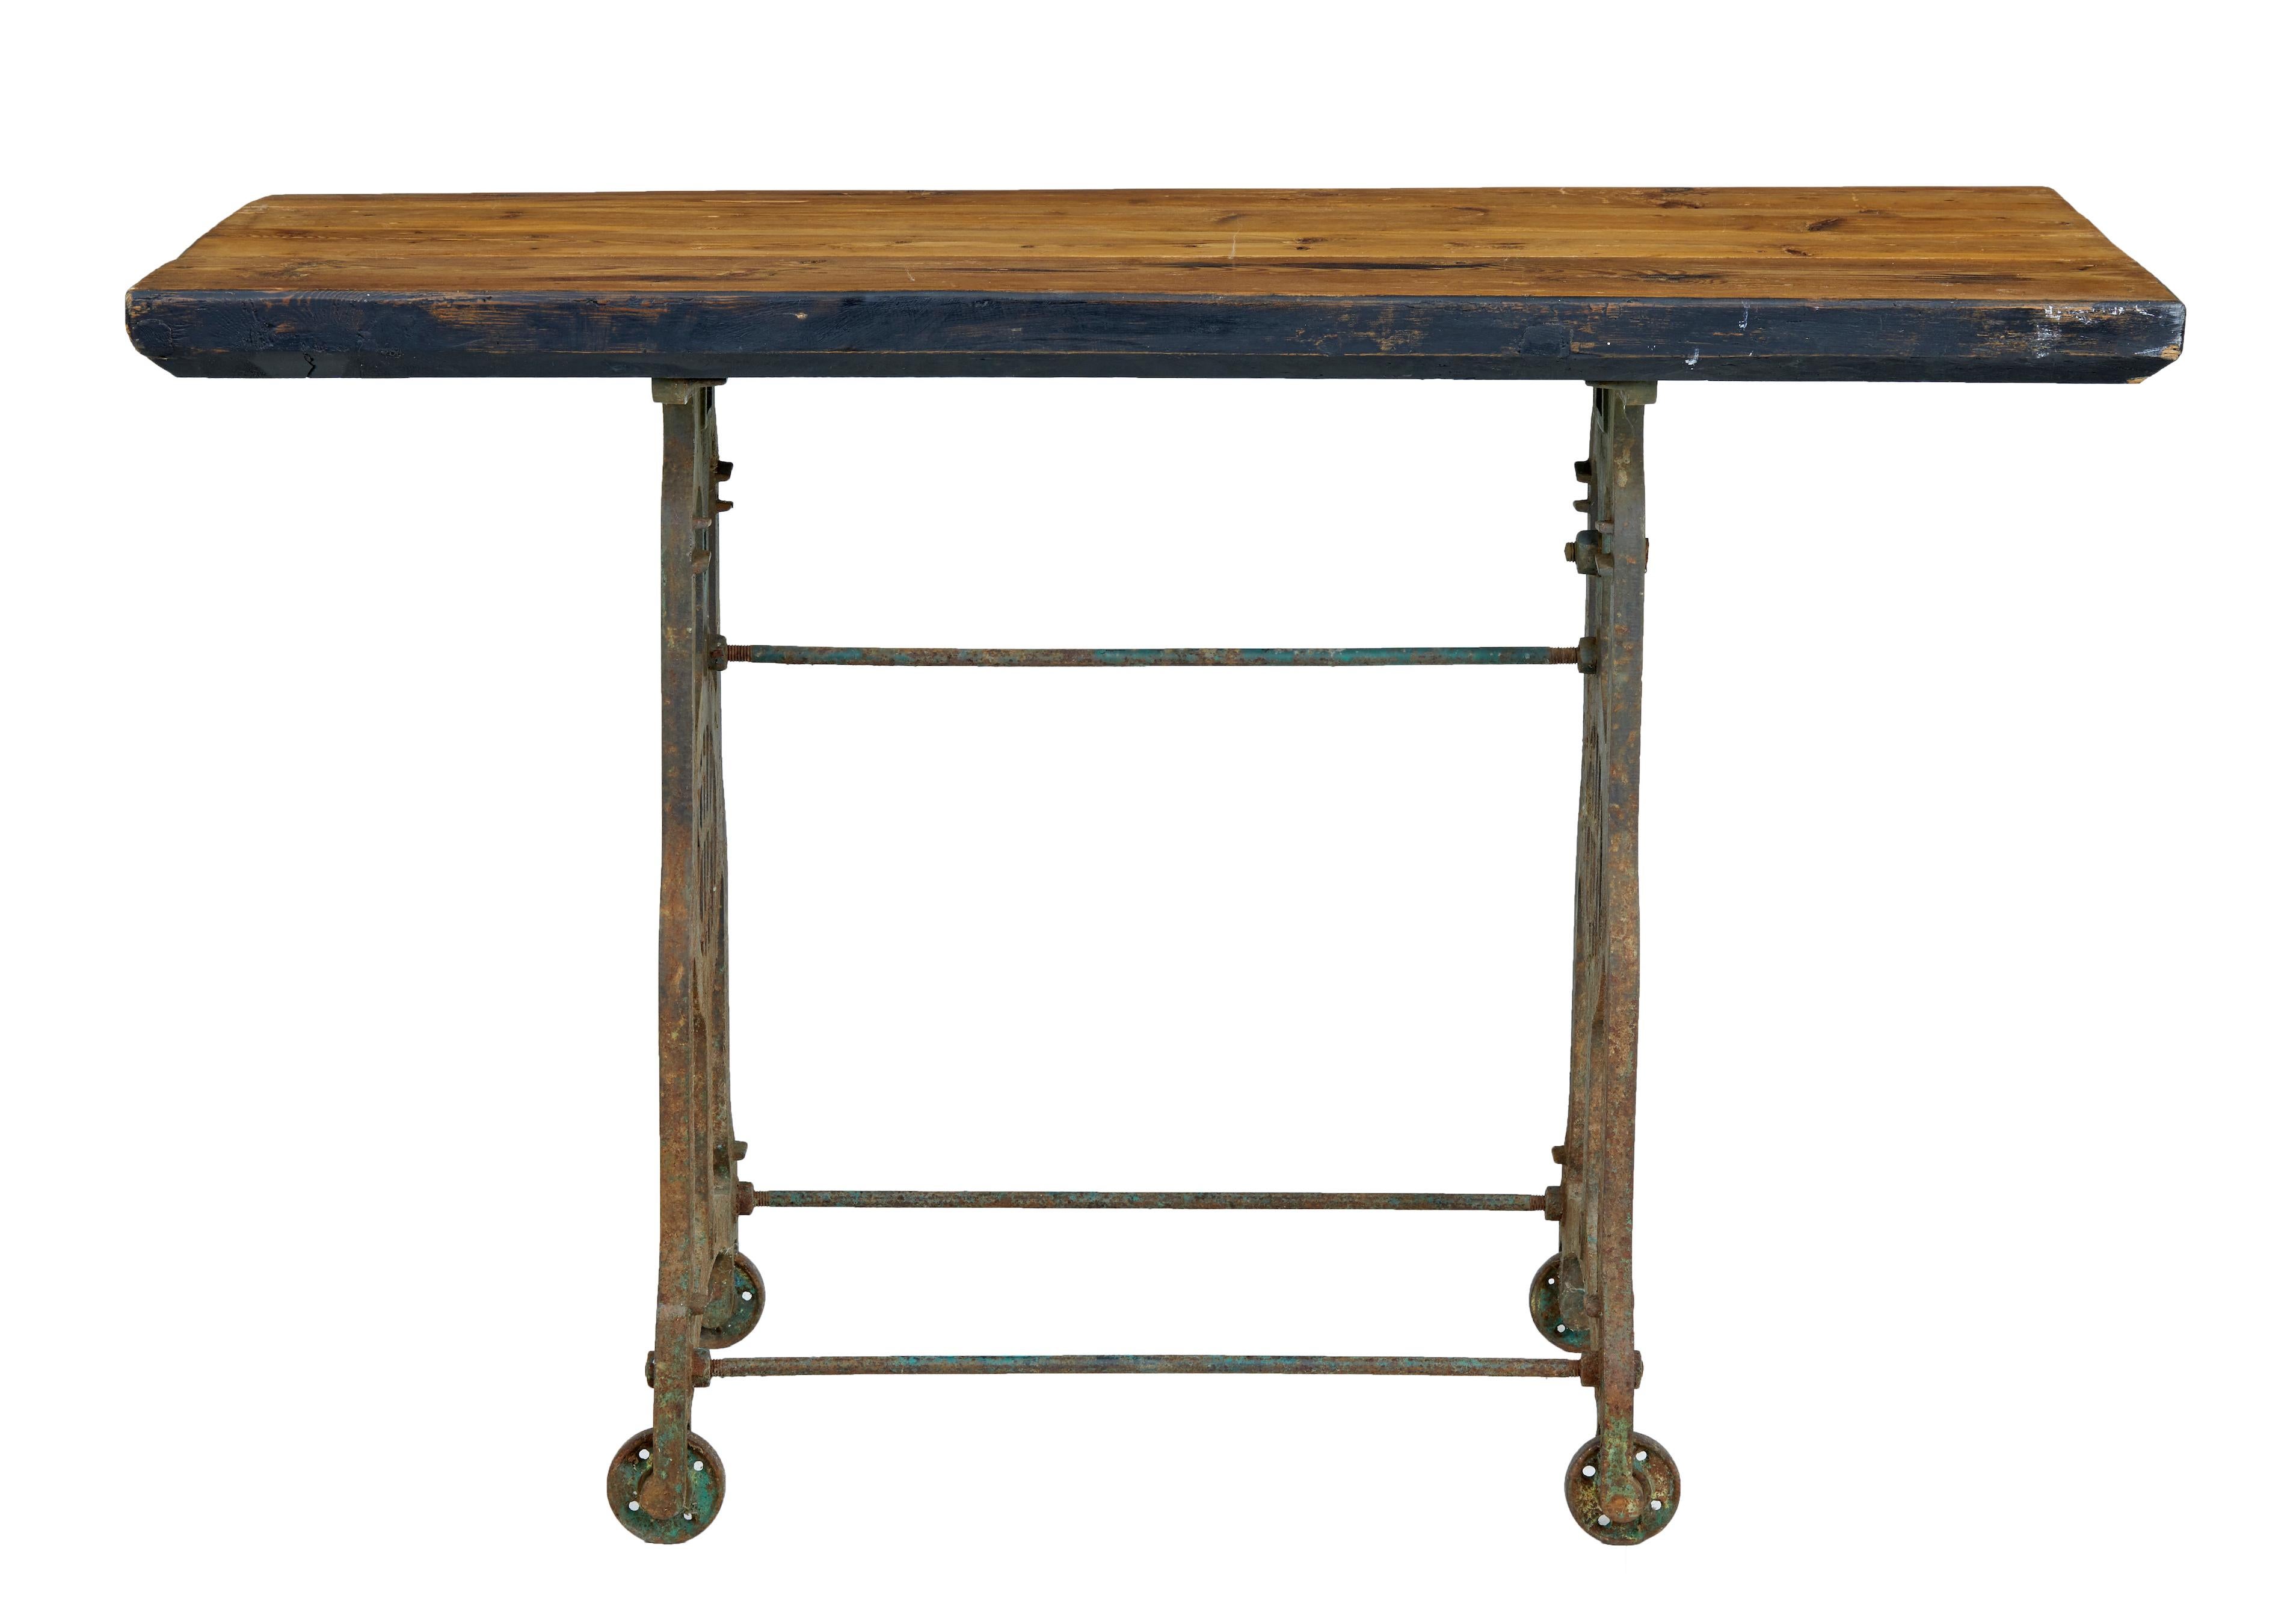 Cast iron base with thick pine top, circa 1900.

Decorative cast iron base which was formerly a sowing table base, with original green and yellow paint, intials of nhb on either end. Complete with fixed wheels. Presented with a thick 19th century